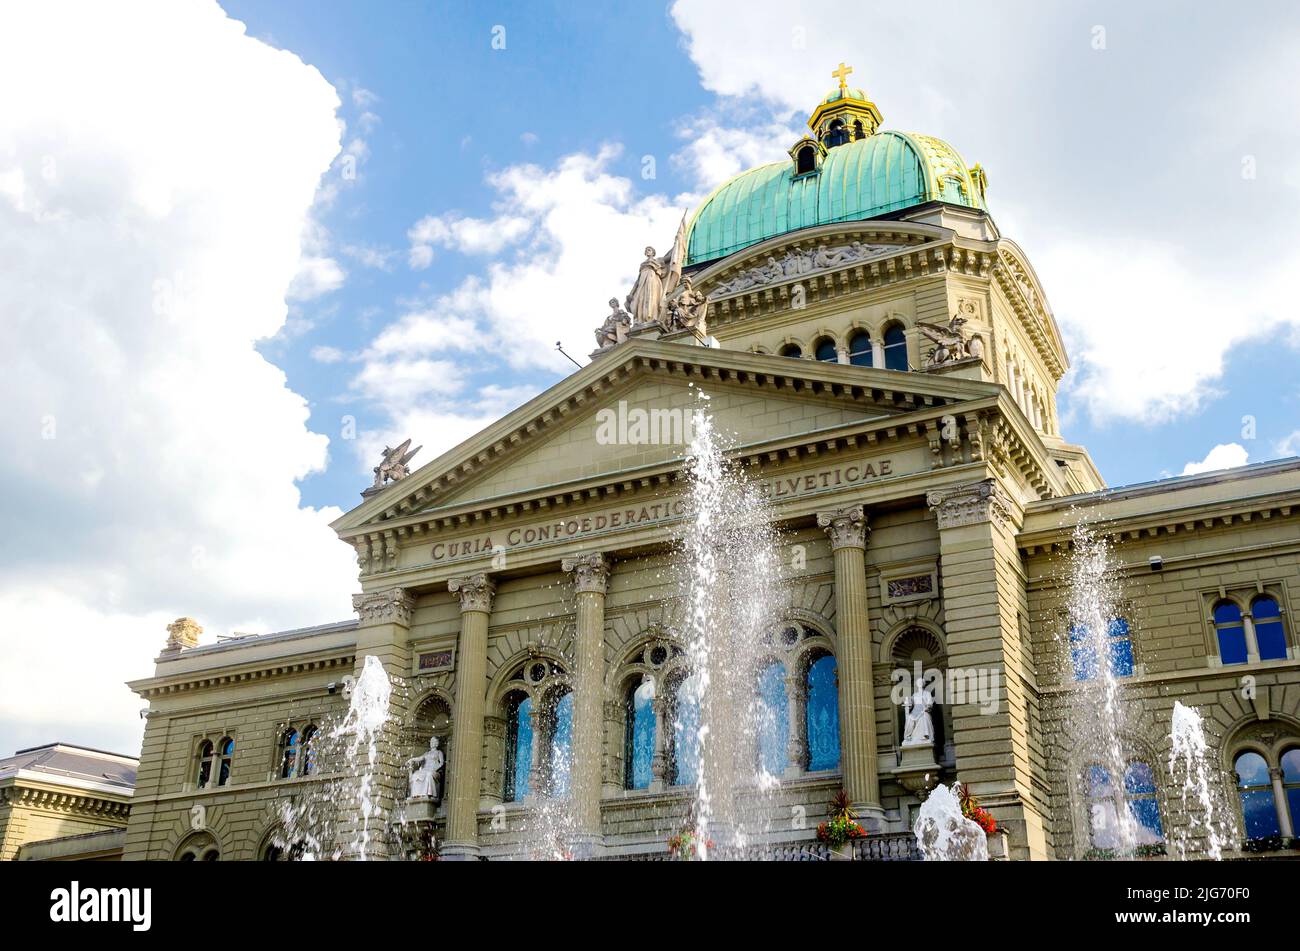 The Federal Palace of Switzerland at Bern the swiss Bundesstadt (federal city) and capital Stock Photo